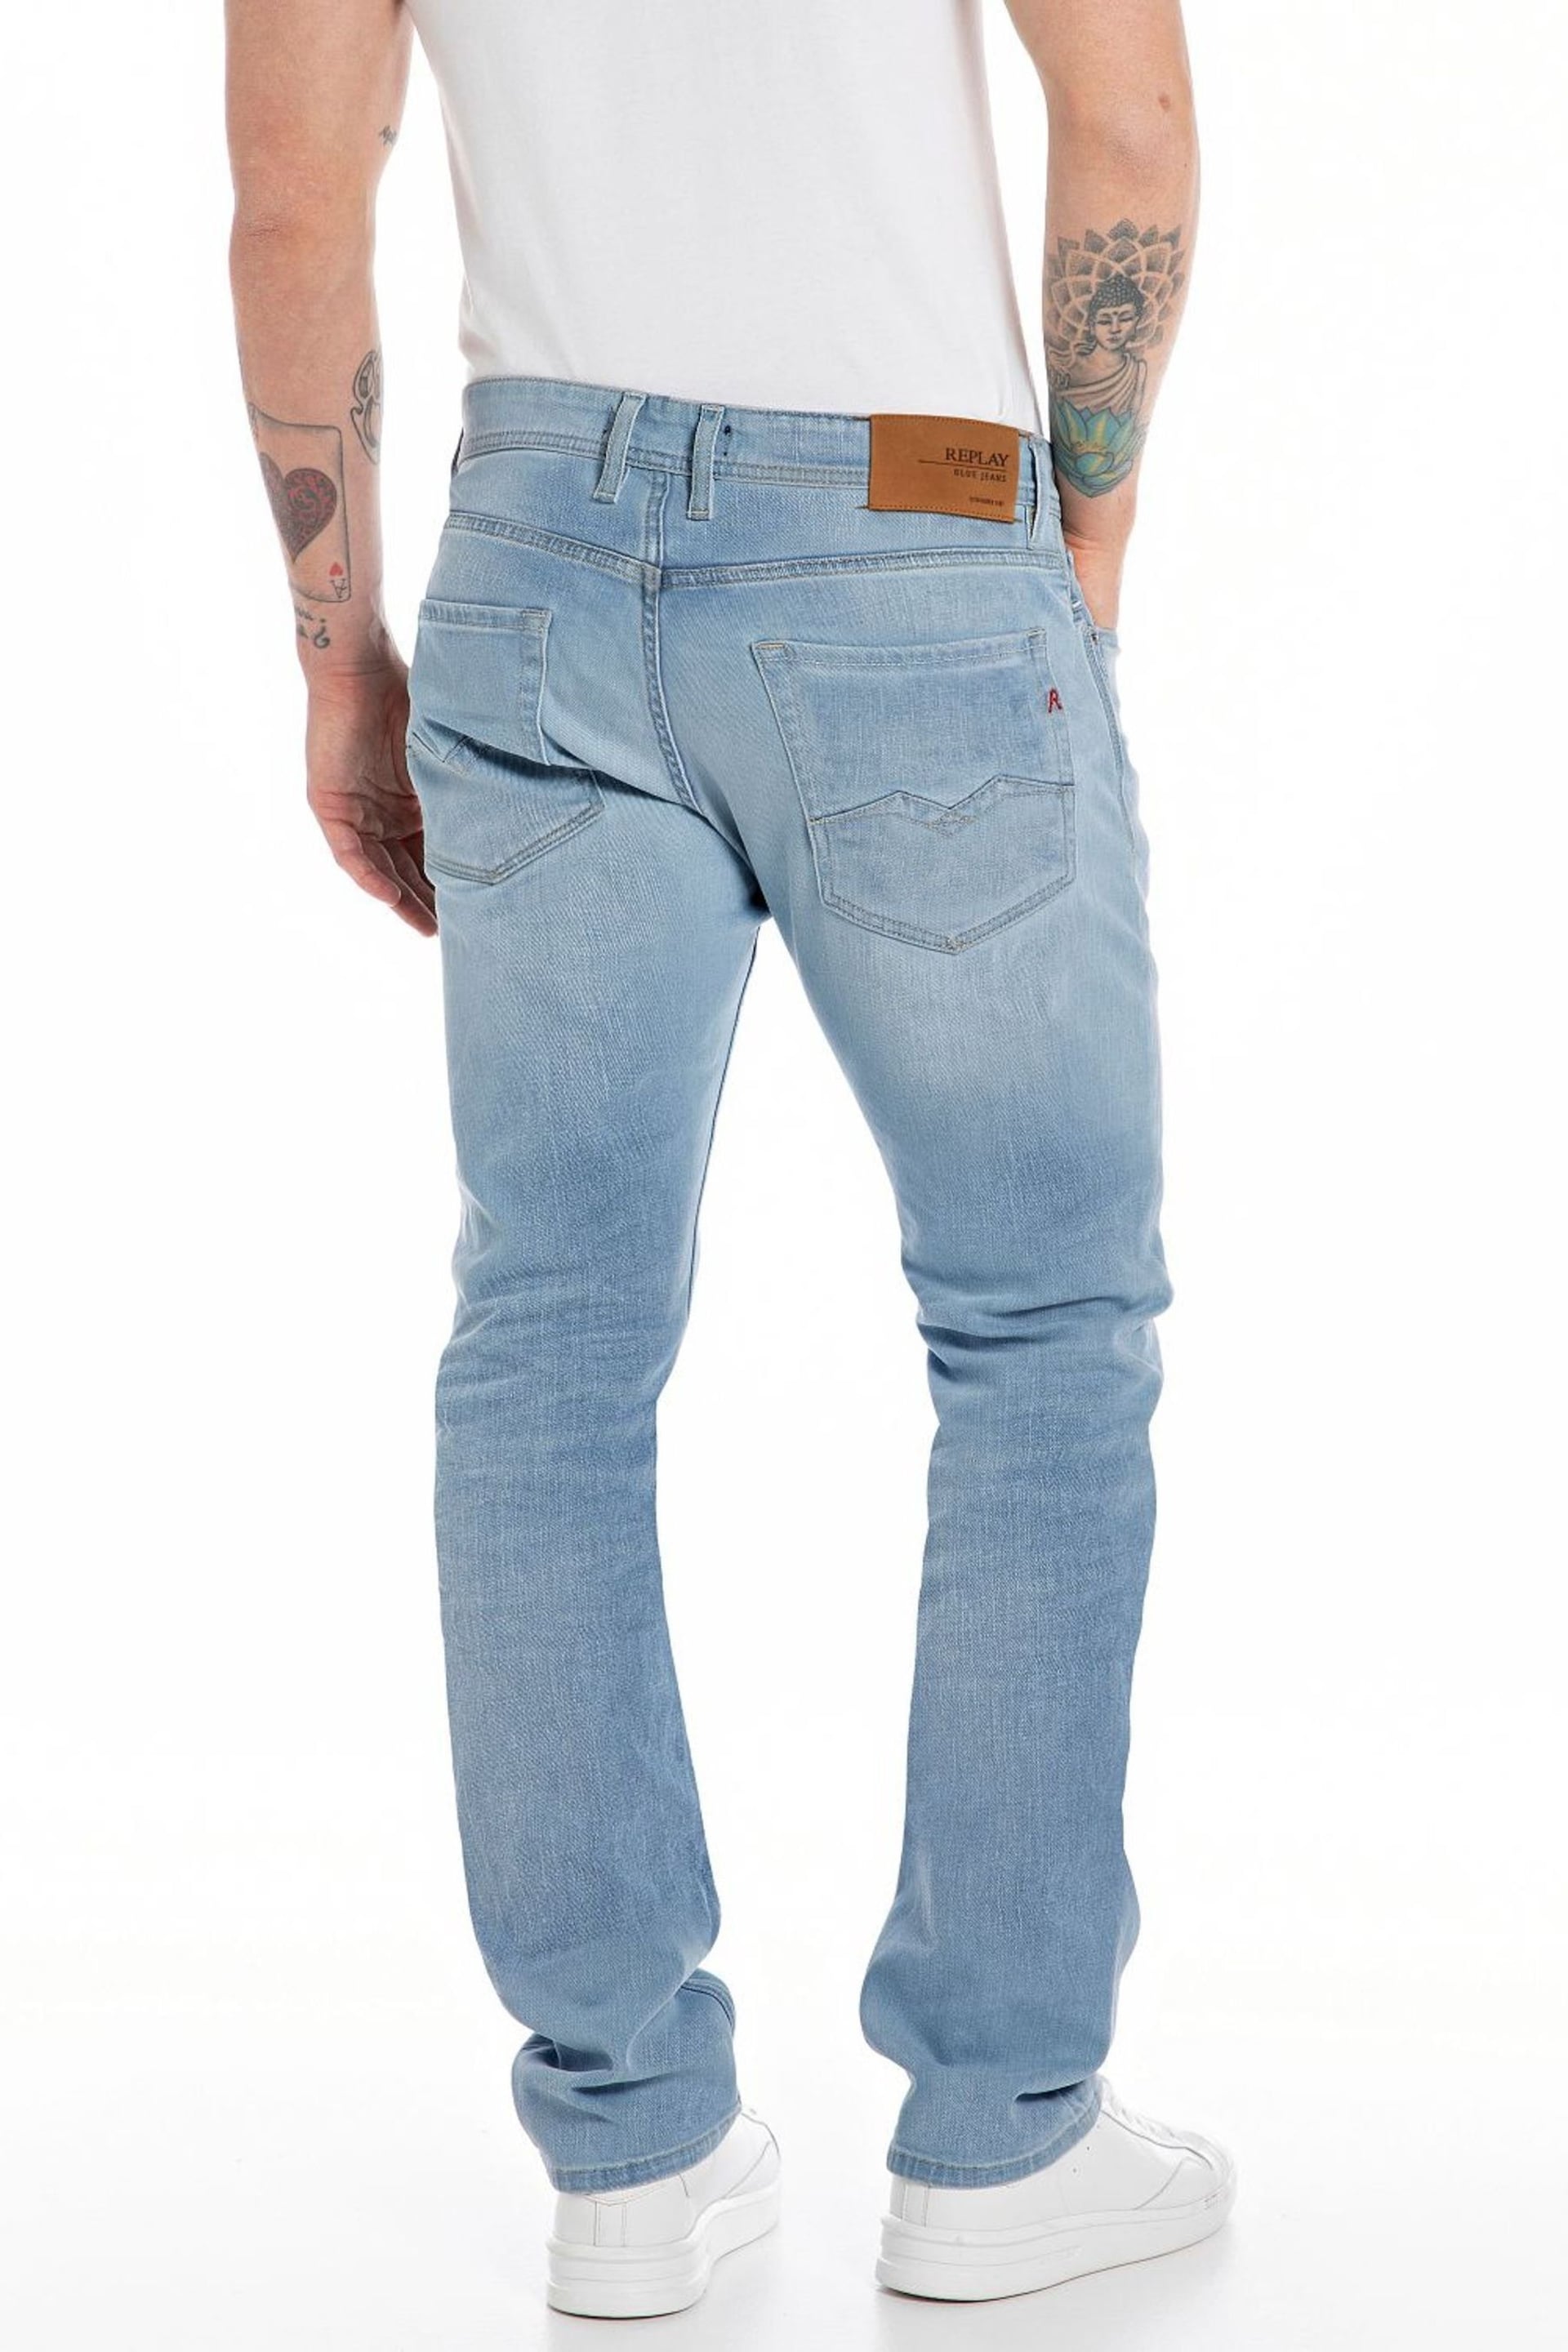 Replay Rocco Relaxed Straight Fit Jeans - Image 2 of 2